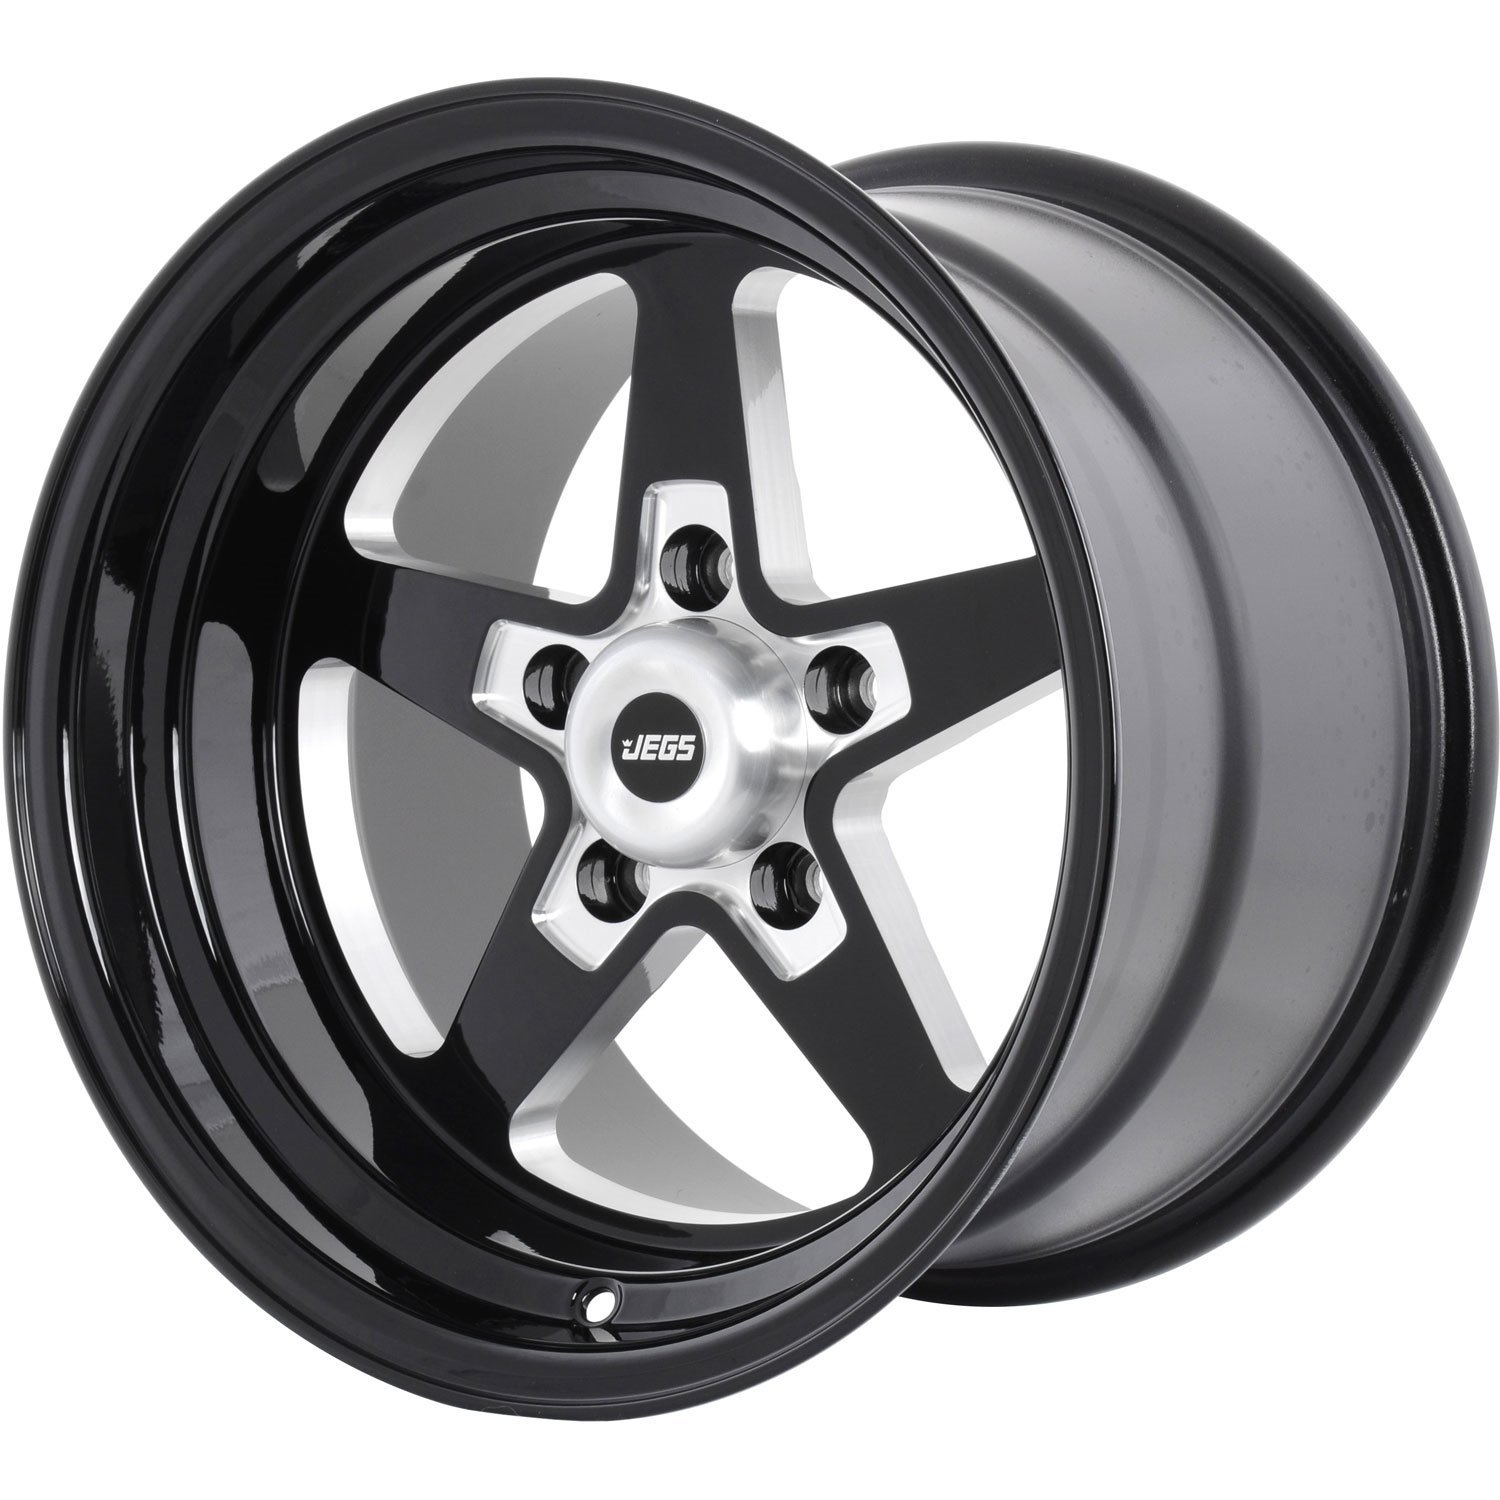 JEGS 681284: SSR Star Wheel [15" x 10"] | Bolt Pattern: 5 x 4.50" | Black |  Includes center cap | DOT Approved | Back Spacing: 5.5" | Offset: 0 mm |  Each - JEGS